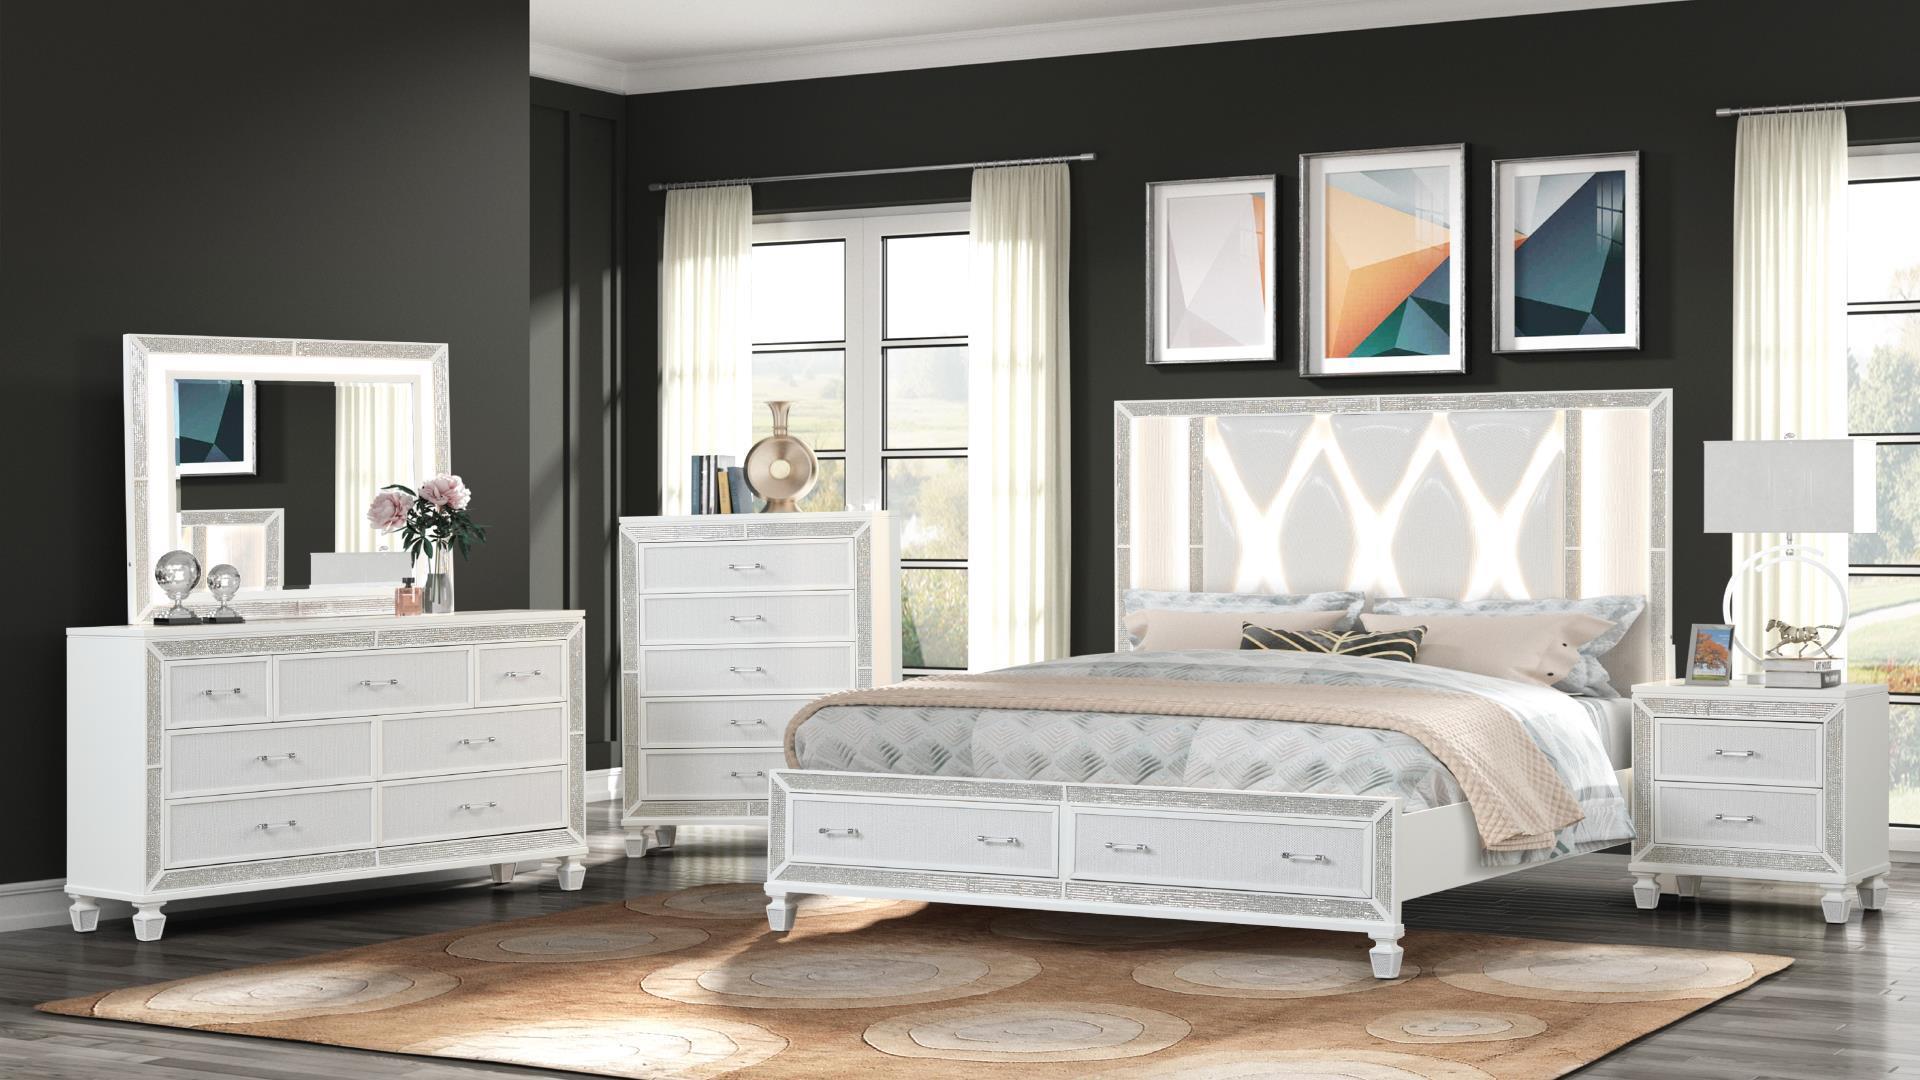 

    
Glam White Solid Wood Queen Bed Set 4Pcs CRYSTAL Galaxy Home Modern Contemporary
